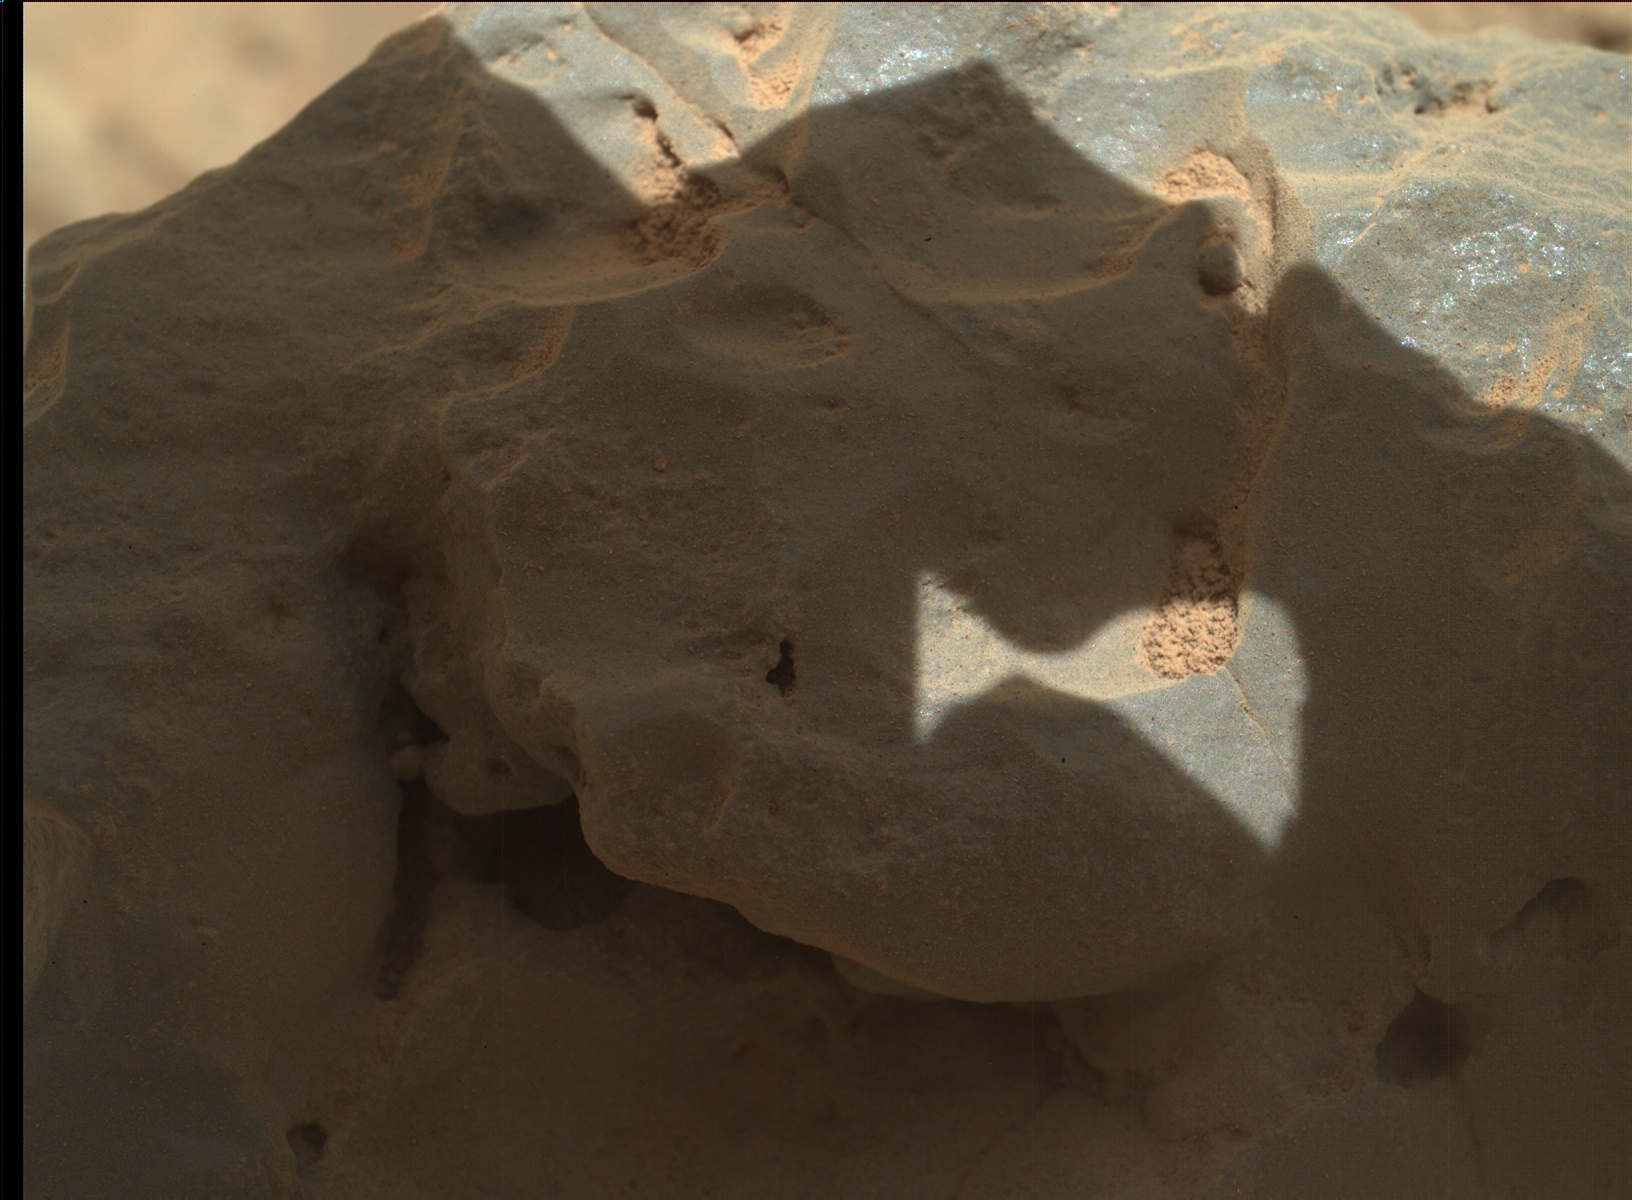 Nasa's Mars rover Curiosity acquired this image using its Mars Hand Lens Imager (MAHLI) on Sol 560